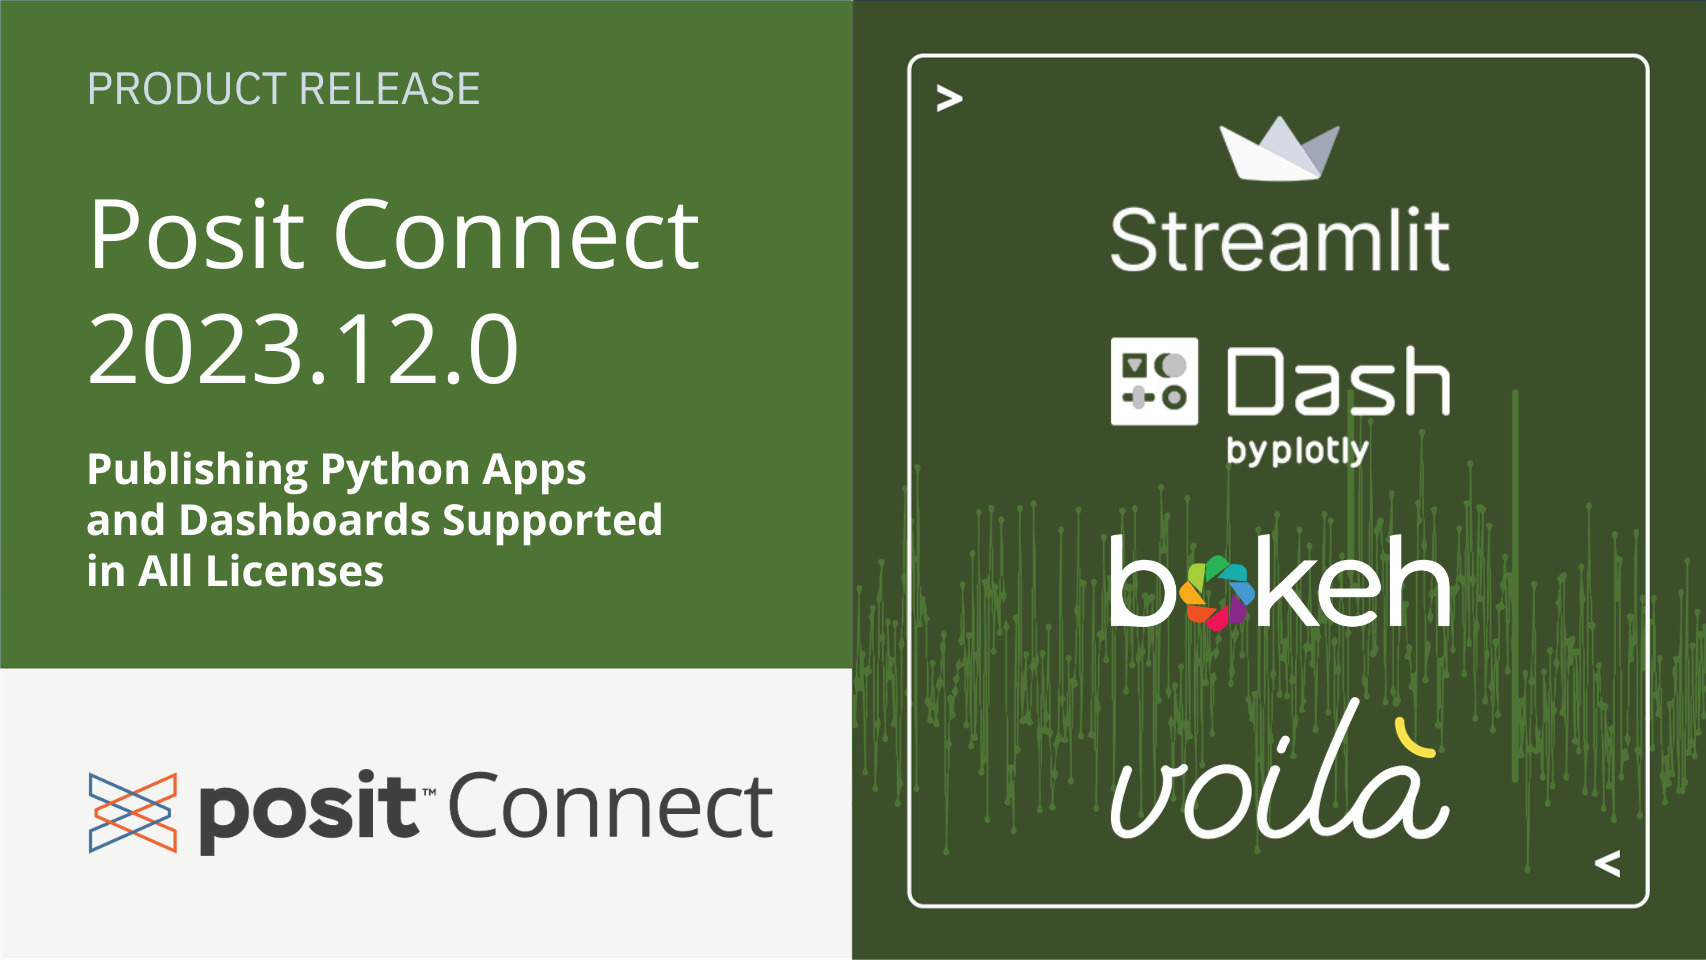 Text: Product Release Posit Connect 2023.12.0 with the Posit Connect logo. On the right, the Streamlit, Dash, Bokeh, and Voilà logos.